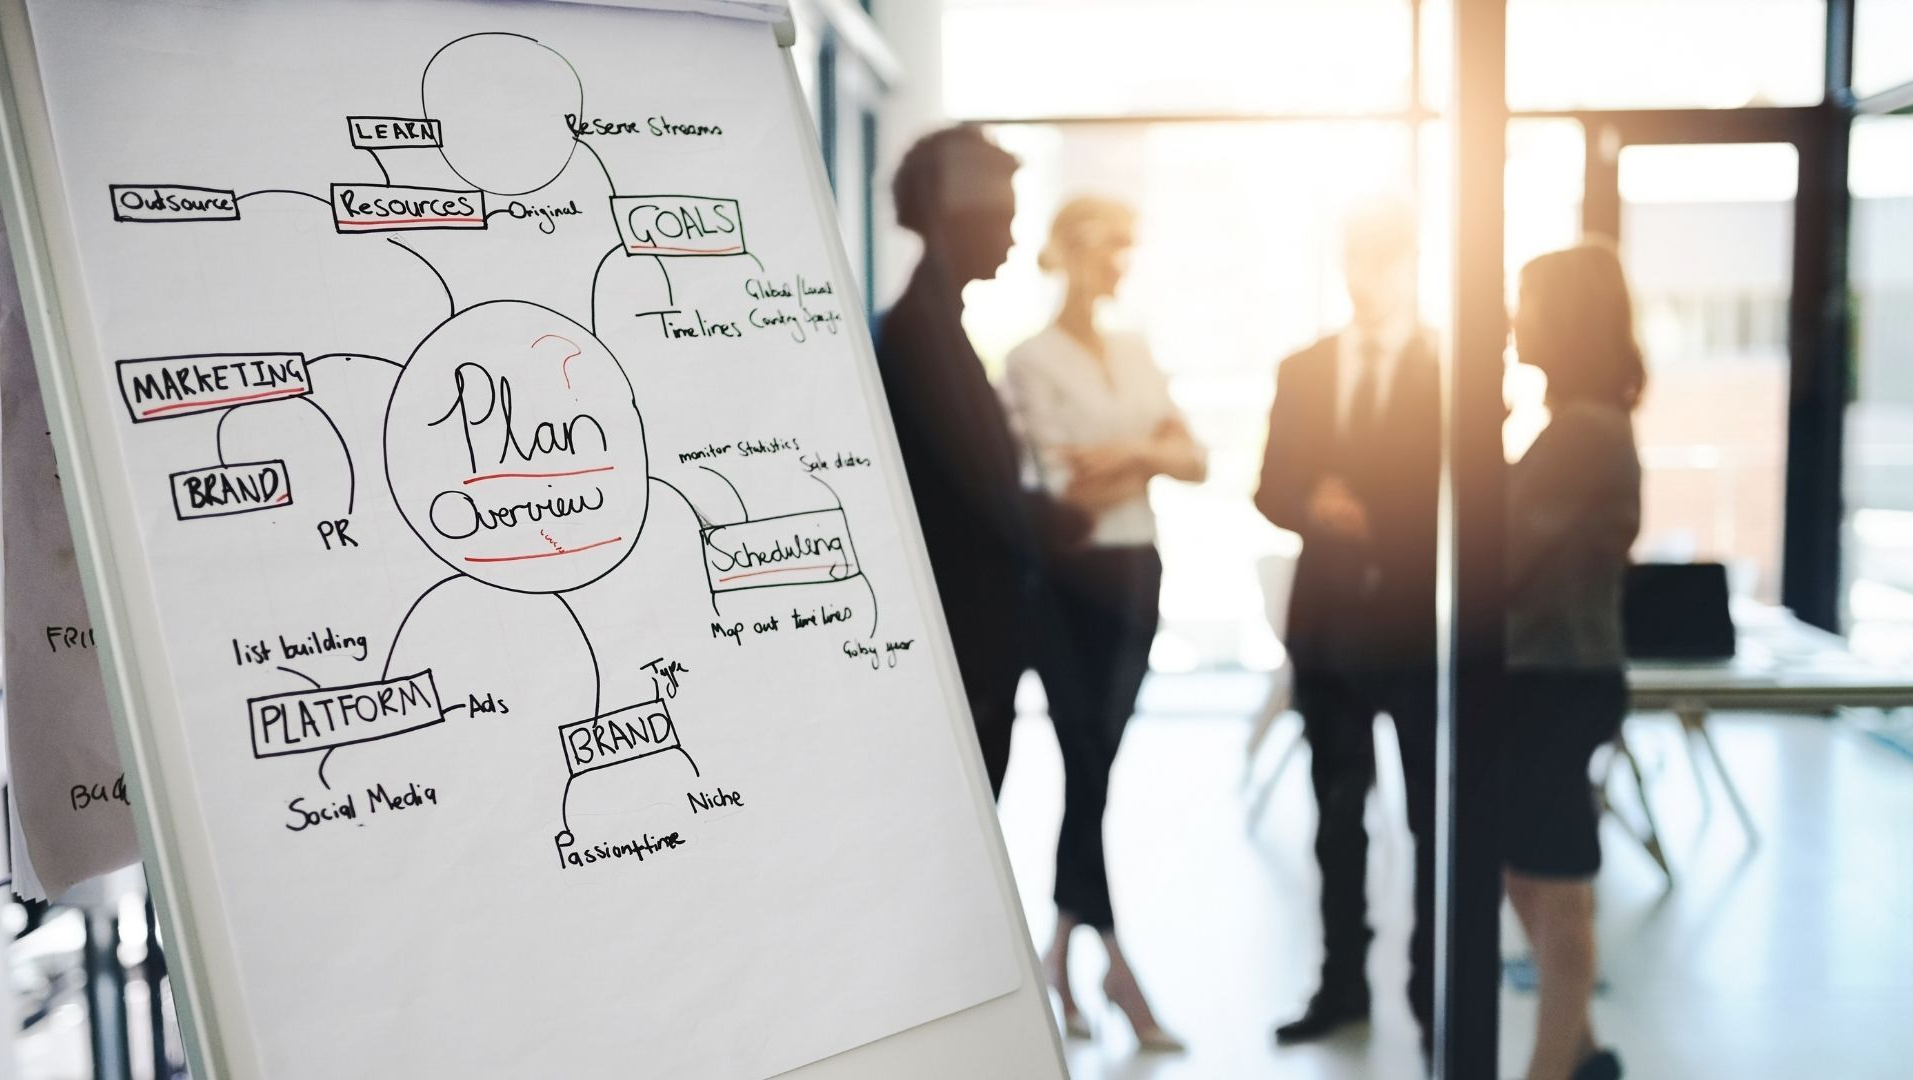 It is important for small business owners to carve out time for strategic planning.